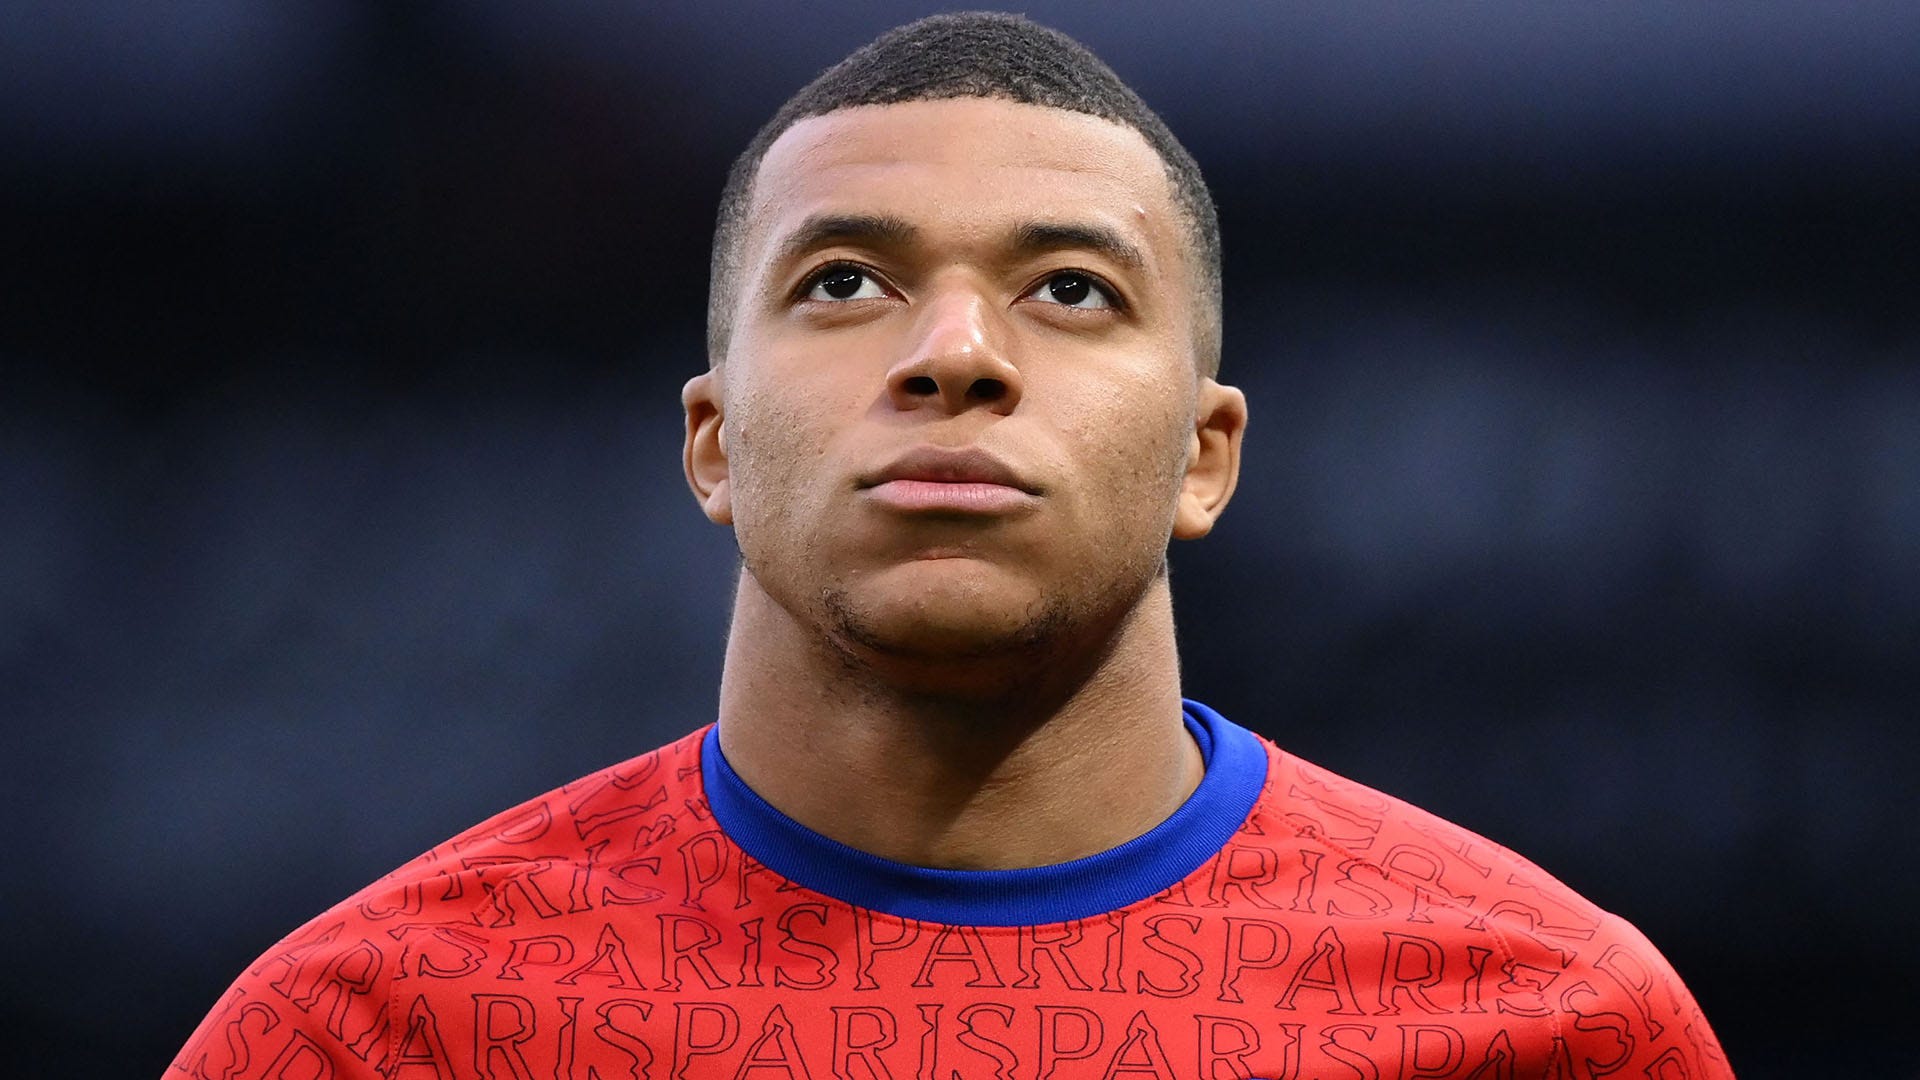 PSG told to bench Mbappe 'all year' if he snubs contract as Di Meco calls  for power play 